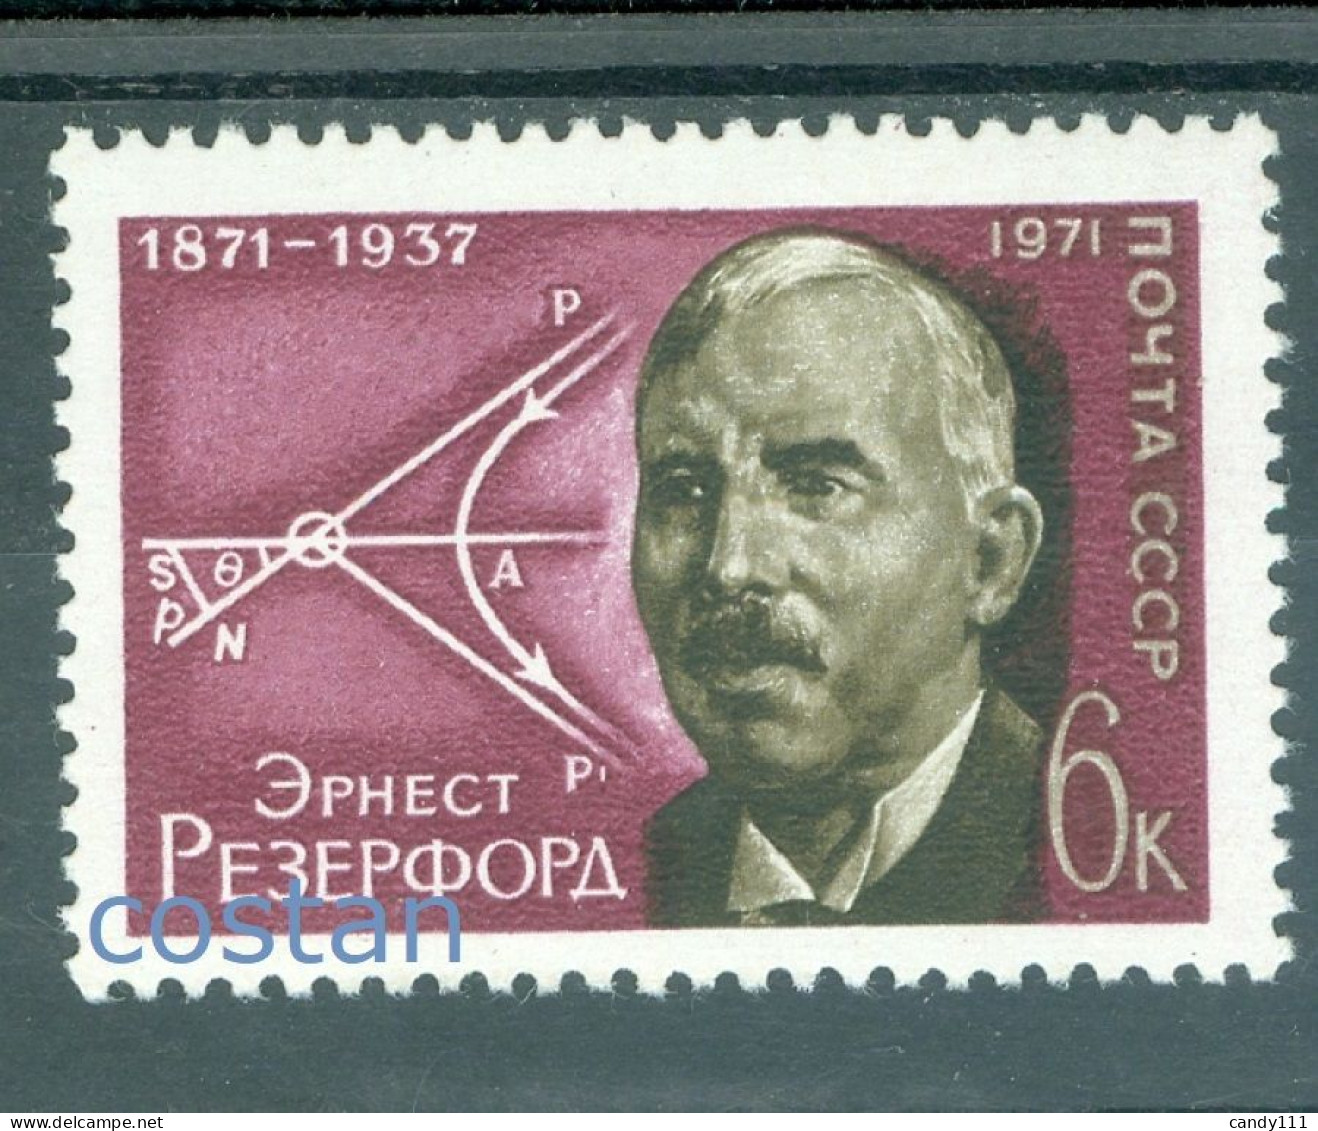 1971 Ernest Rutherford,physicist,Nobel Prize,Nuclear Physics,Russia,3921,MNH - Ungebraucht